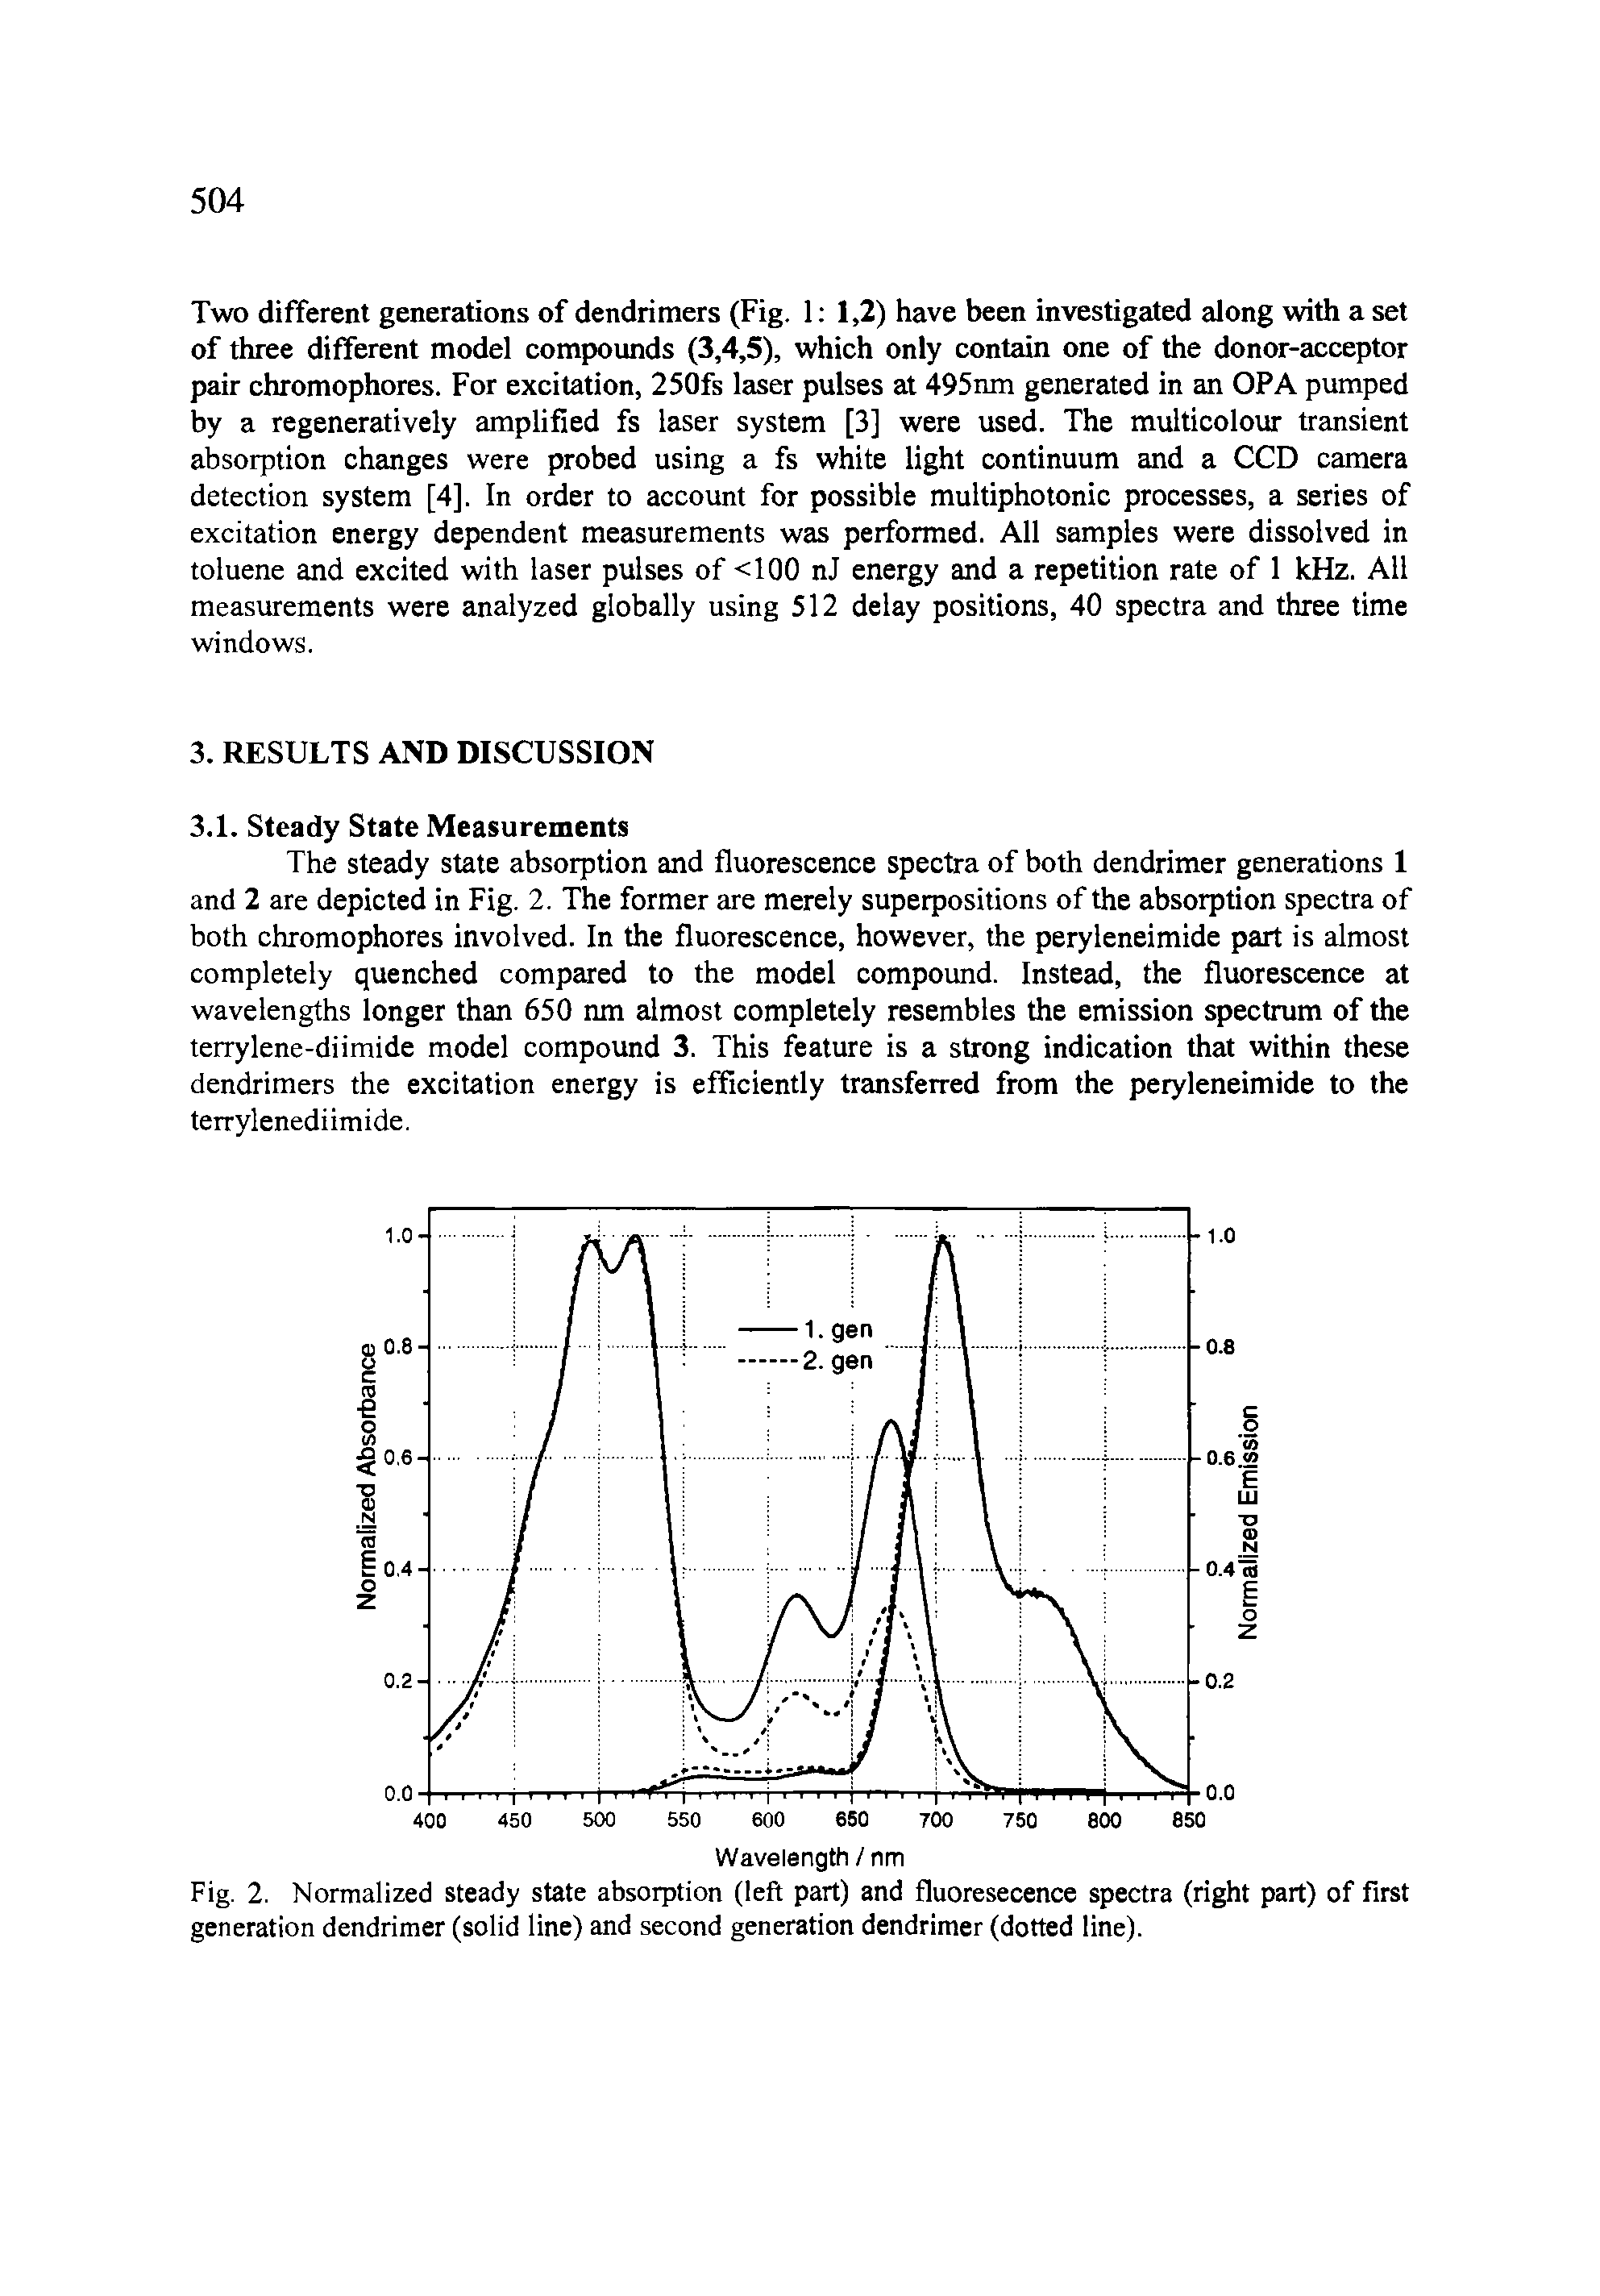 Fig. 2. Normalized steady state absorption (left part) and fluoresecence spectra (right part) of first generation dendrimer (solid line) and second generation dendrimer (dotted line).